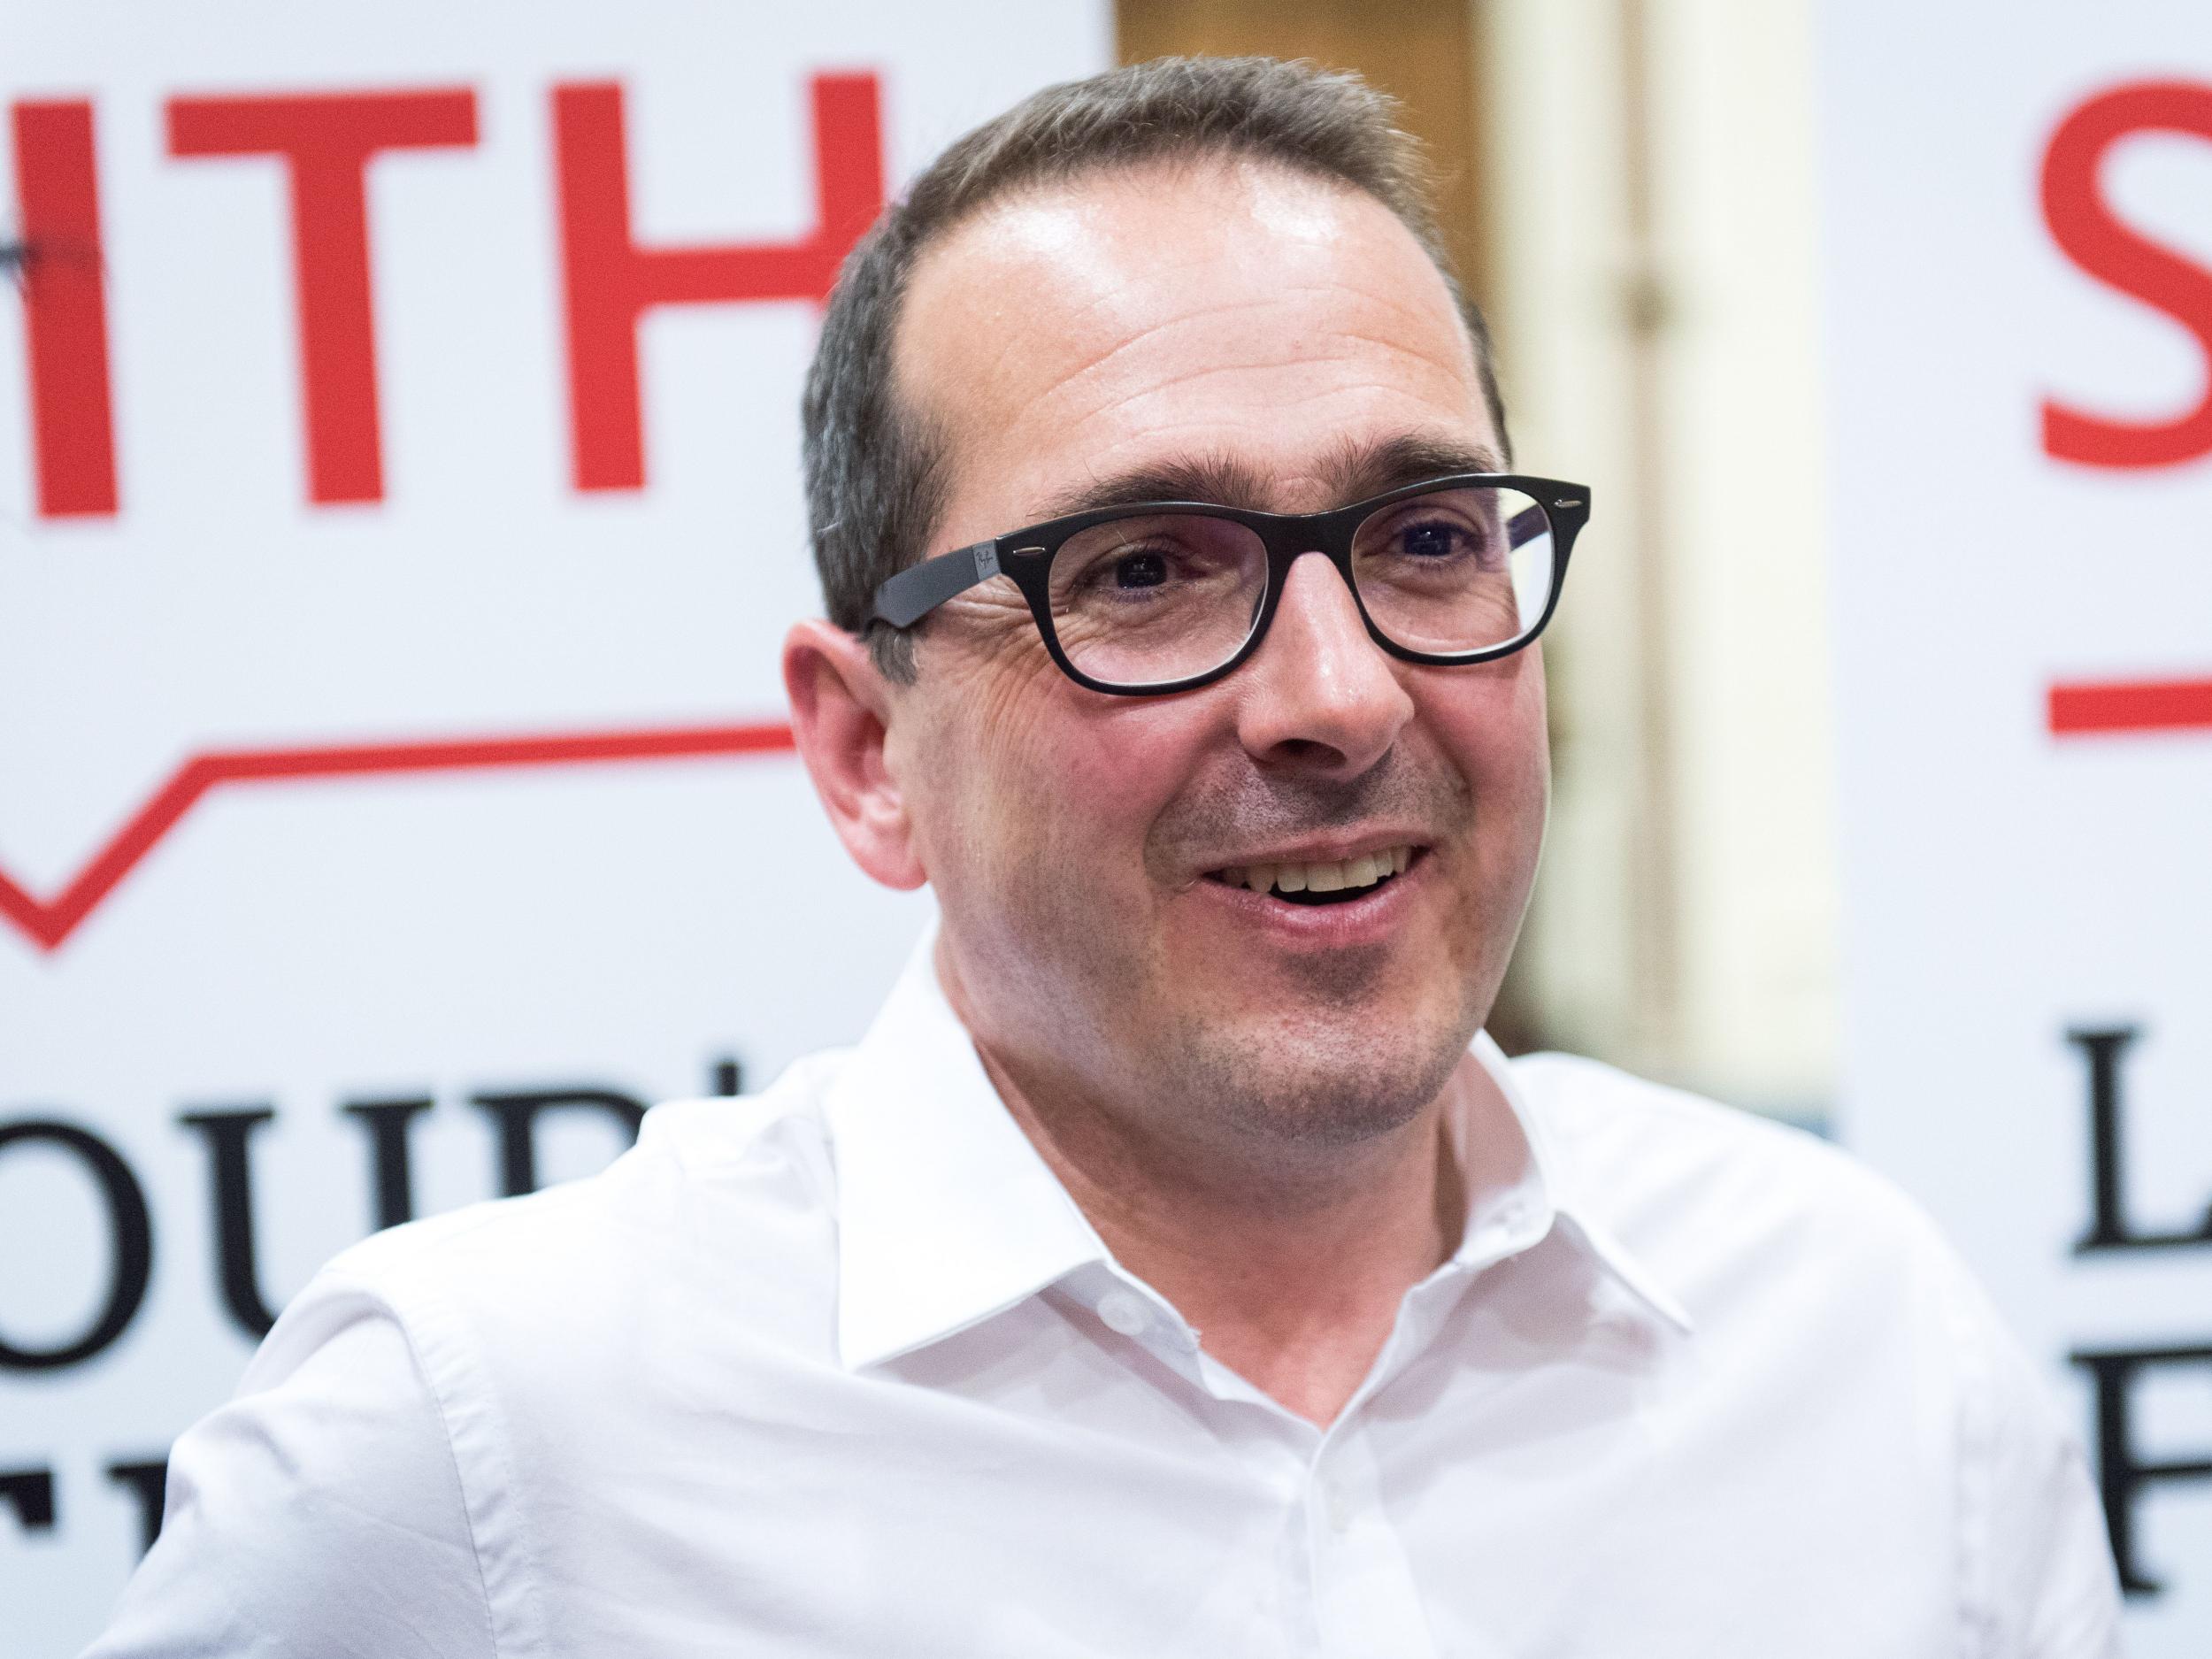 Leadership challenger Owen Smith remains optimistic despite widespread predictions of victory for Mr Corbyn